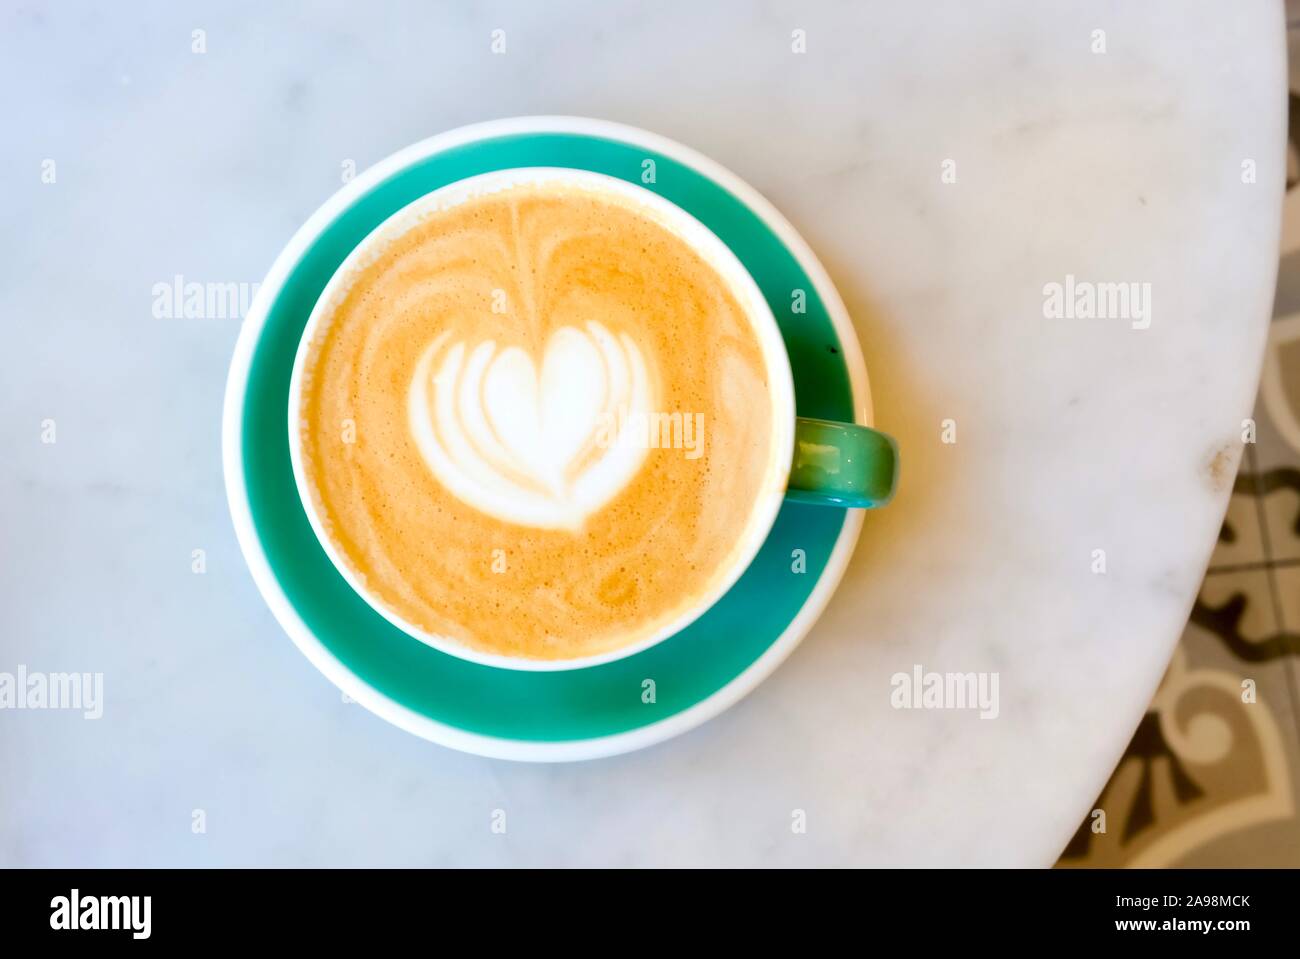 Cup of coffee. Stock Photo